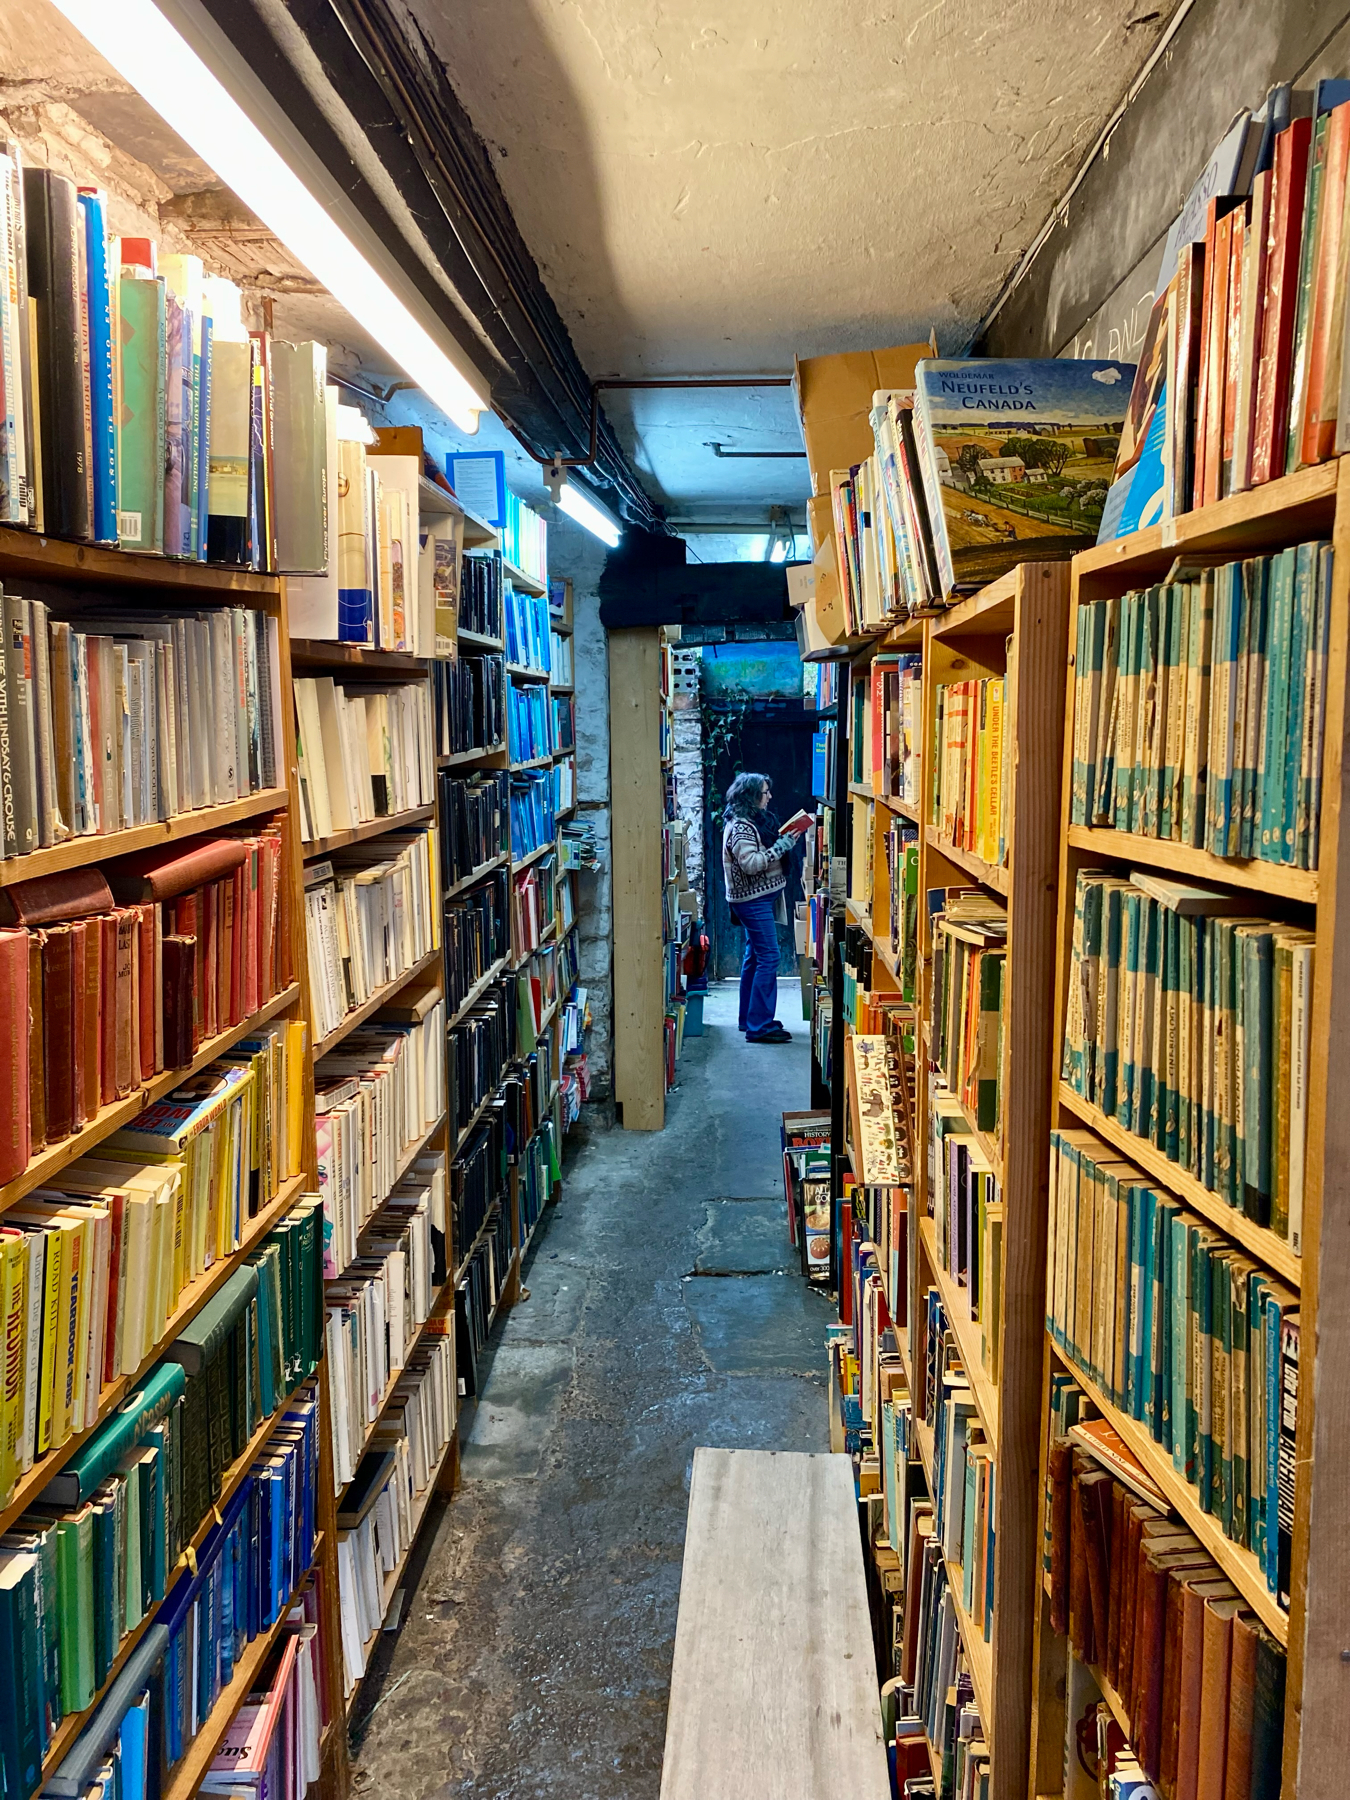 A narrow bookshop aisle with tall wooden shelves filled with various books on either side. A person is browsing books in the background, under fluorescent lighting.